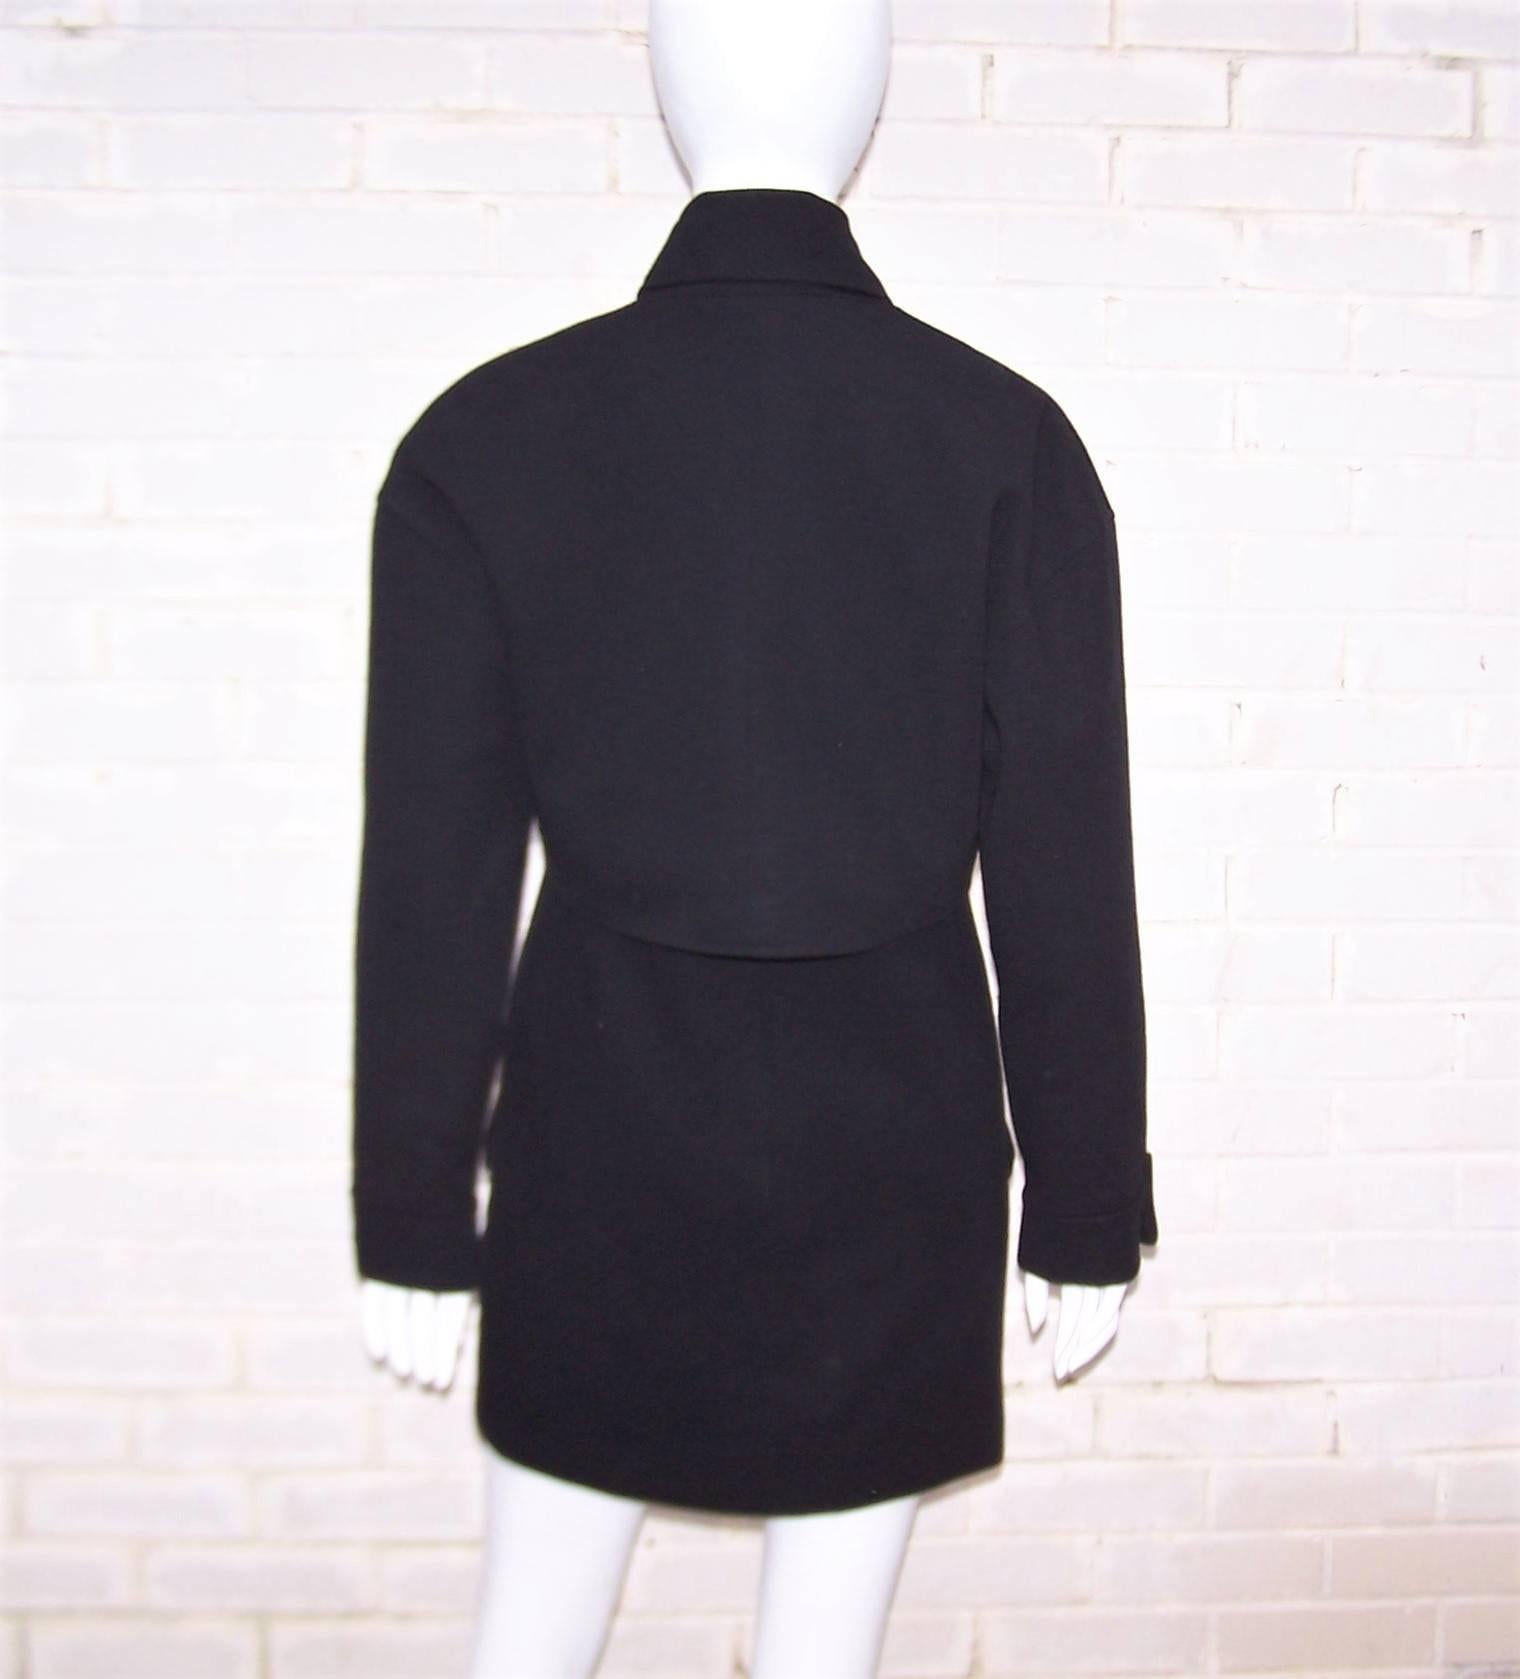 Women's Youthful 1980's Chanel Boutique Black Jumper Dress With Cropped Jacket